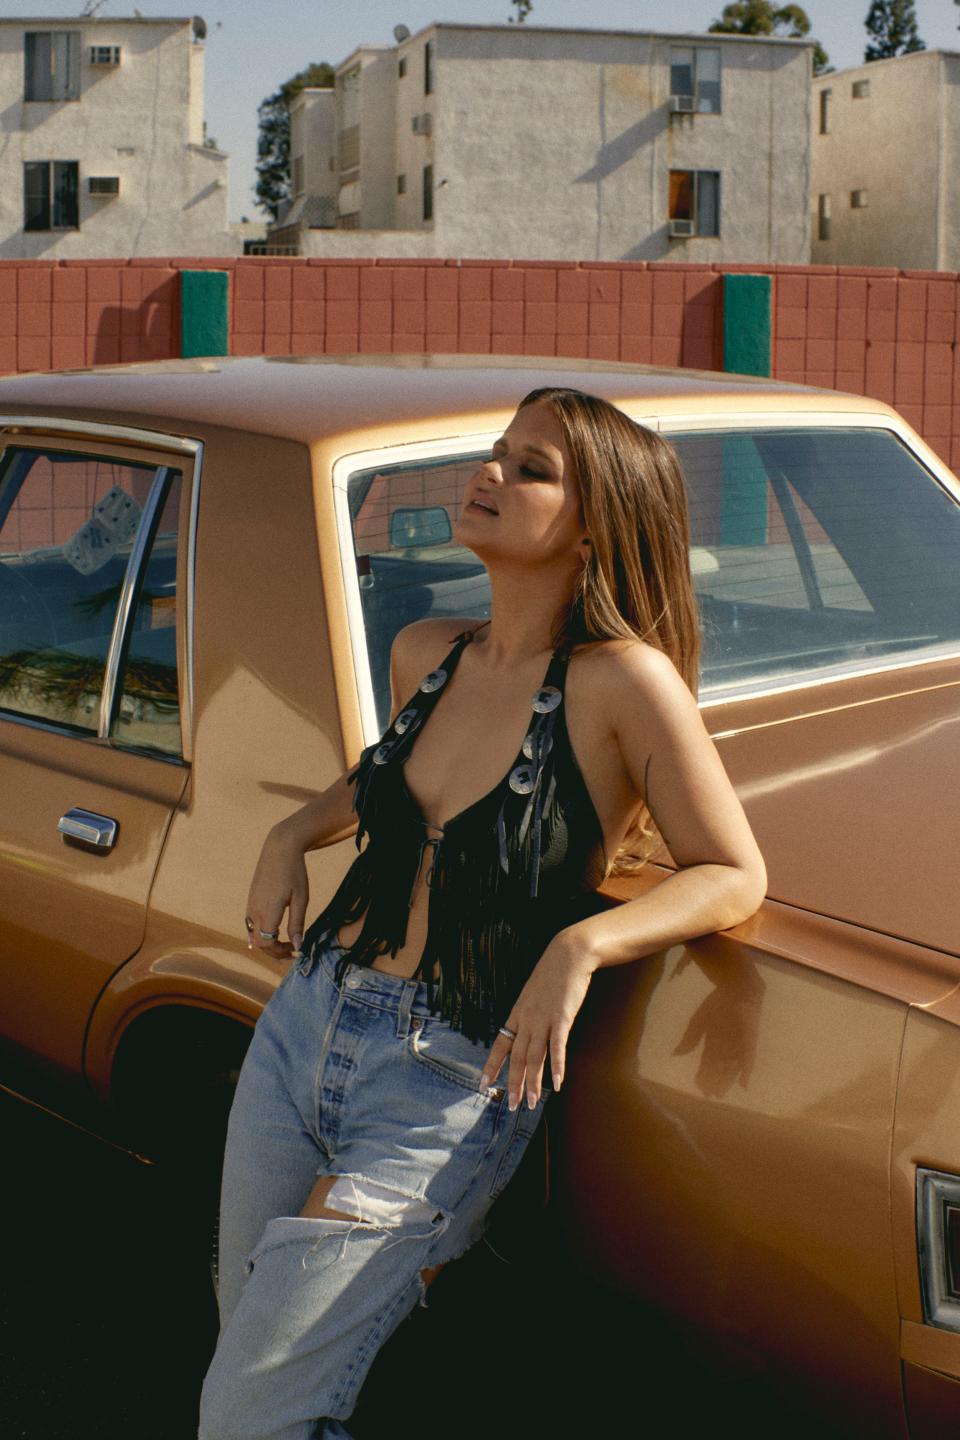 Maren Morris' 2022 tour kicked off Thursday in Raleigh, N.C., and will travel the country through late fall.